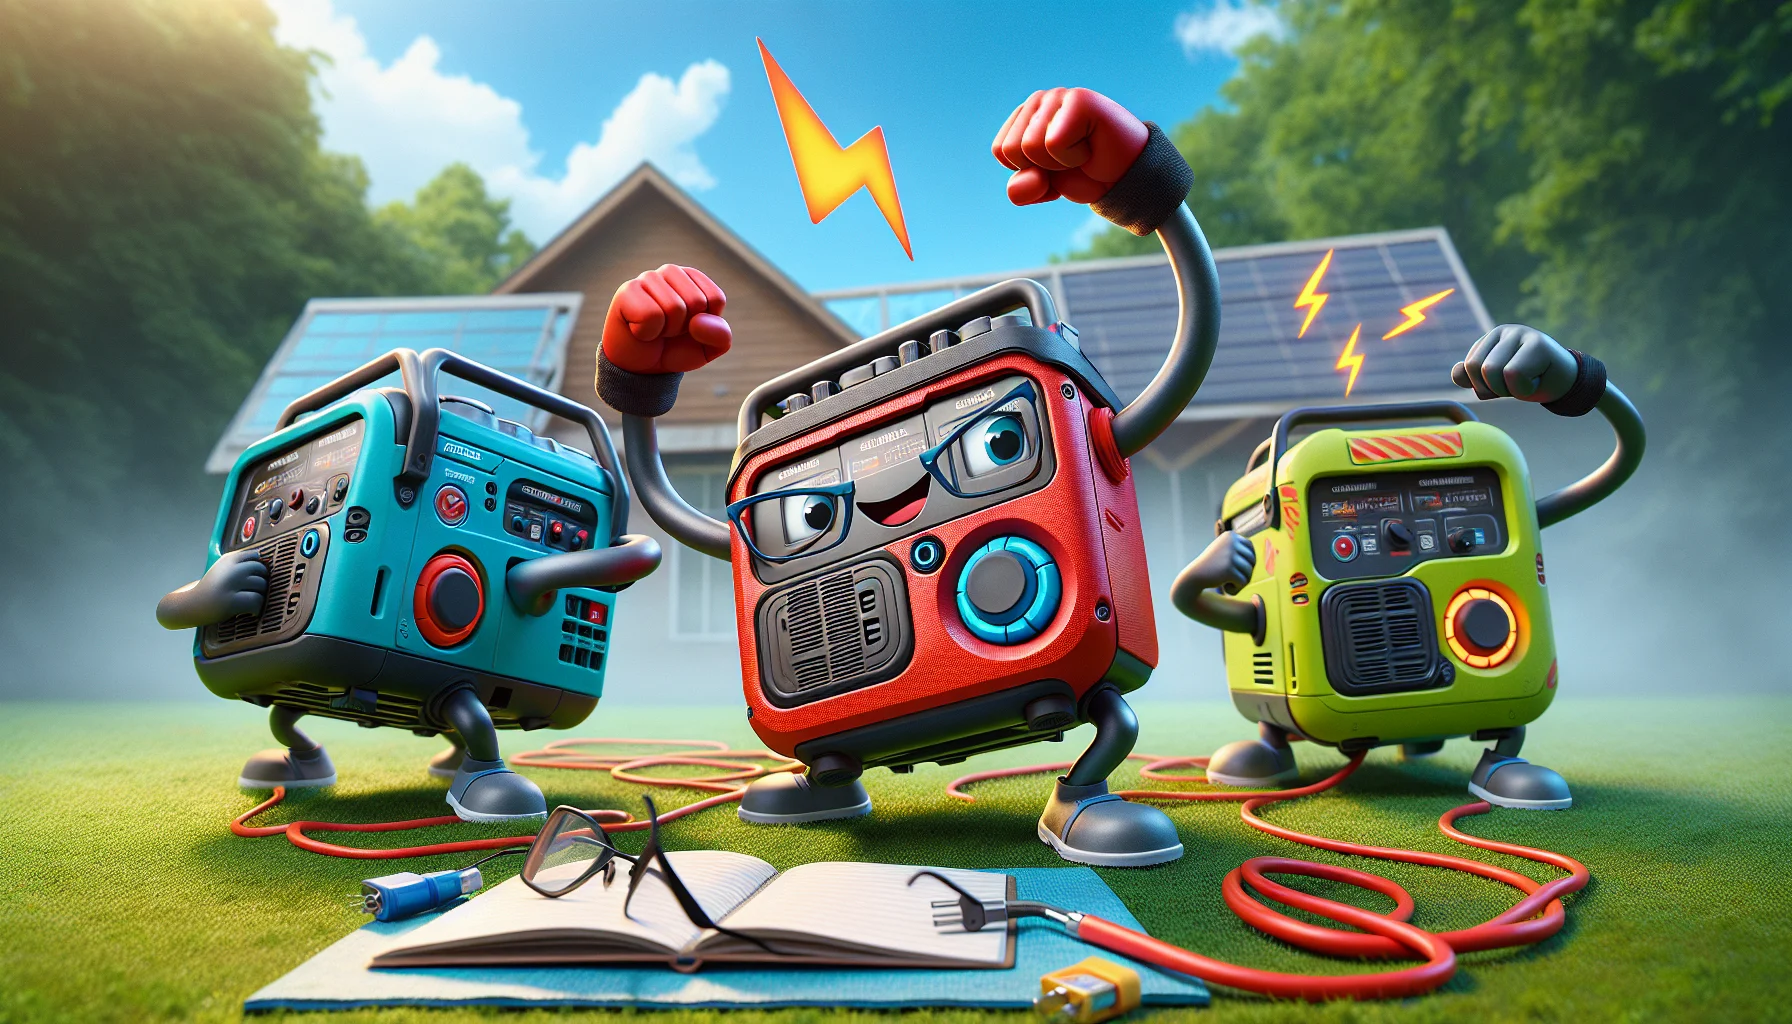 Create an amusing scene involving small portable generators. In this scene, three small portable generators have been anthropomorphized, each showcasing a different personality trait. The first one, a robust-looking generator with a red body and light blue touch-ups, is flexing its cords like muscles with a cheerful grin. The second, a neon-yellow generator with cool grey accents, is depicted as studious, with reading glasses and a notepad, carefully monitoring its power output. The final generator, painted in metallic silver with orange stripes, is shown leaping in the air enthusiastically with an 'electric' spark. The background shows a park on a sunny day, suggesting an eco-friendly way to generate electricity.